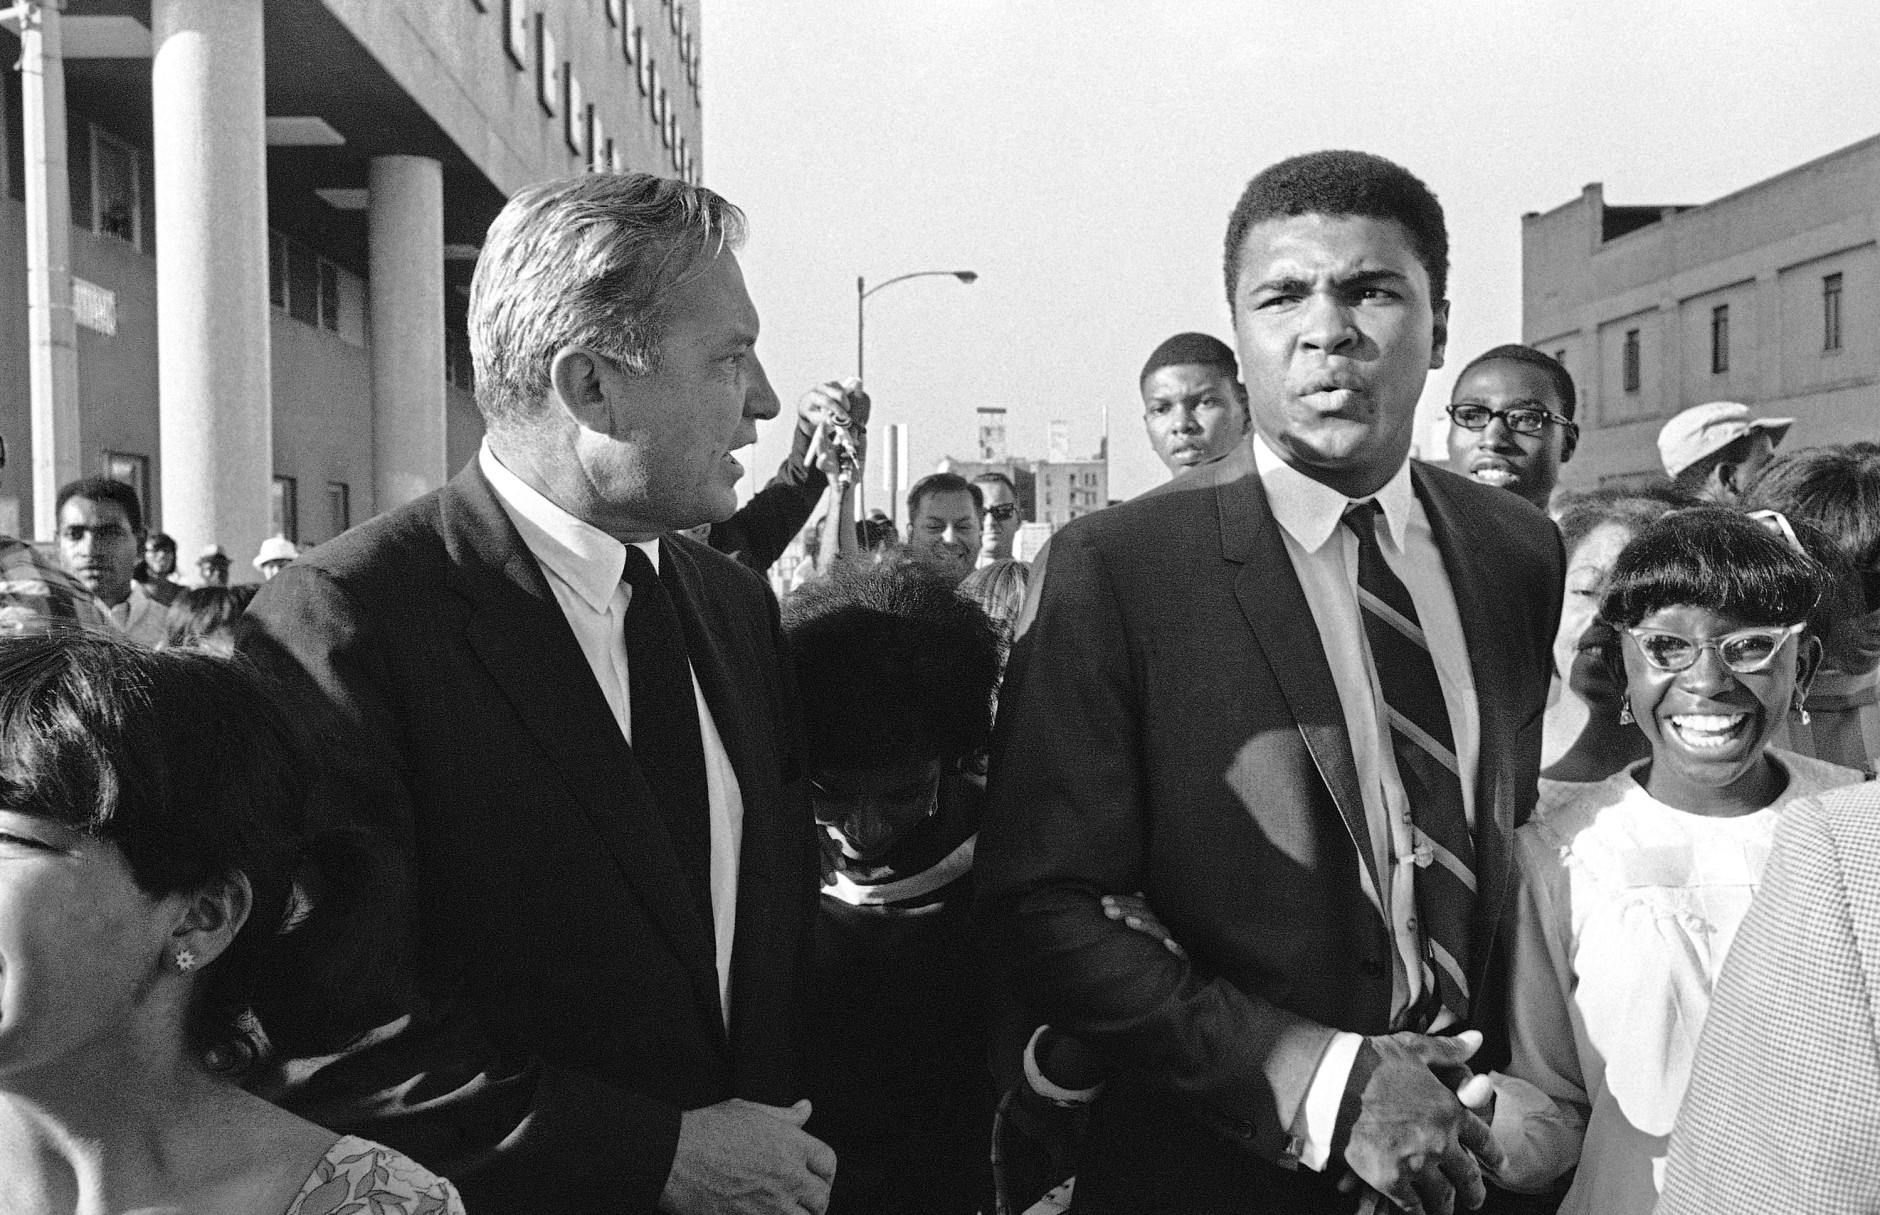 Muhammad Ali outside the Federal Courthouse after he had been found guilty on charges of refusing to be inducted into the Armed Forces on June 20, 1967 in Houston, Texas. (AP Photo)